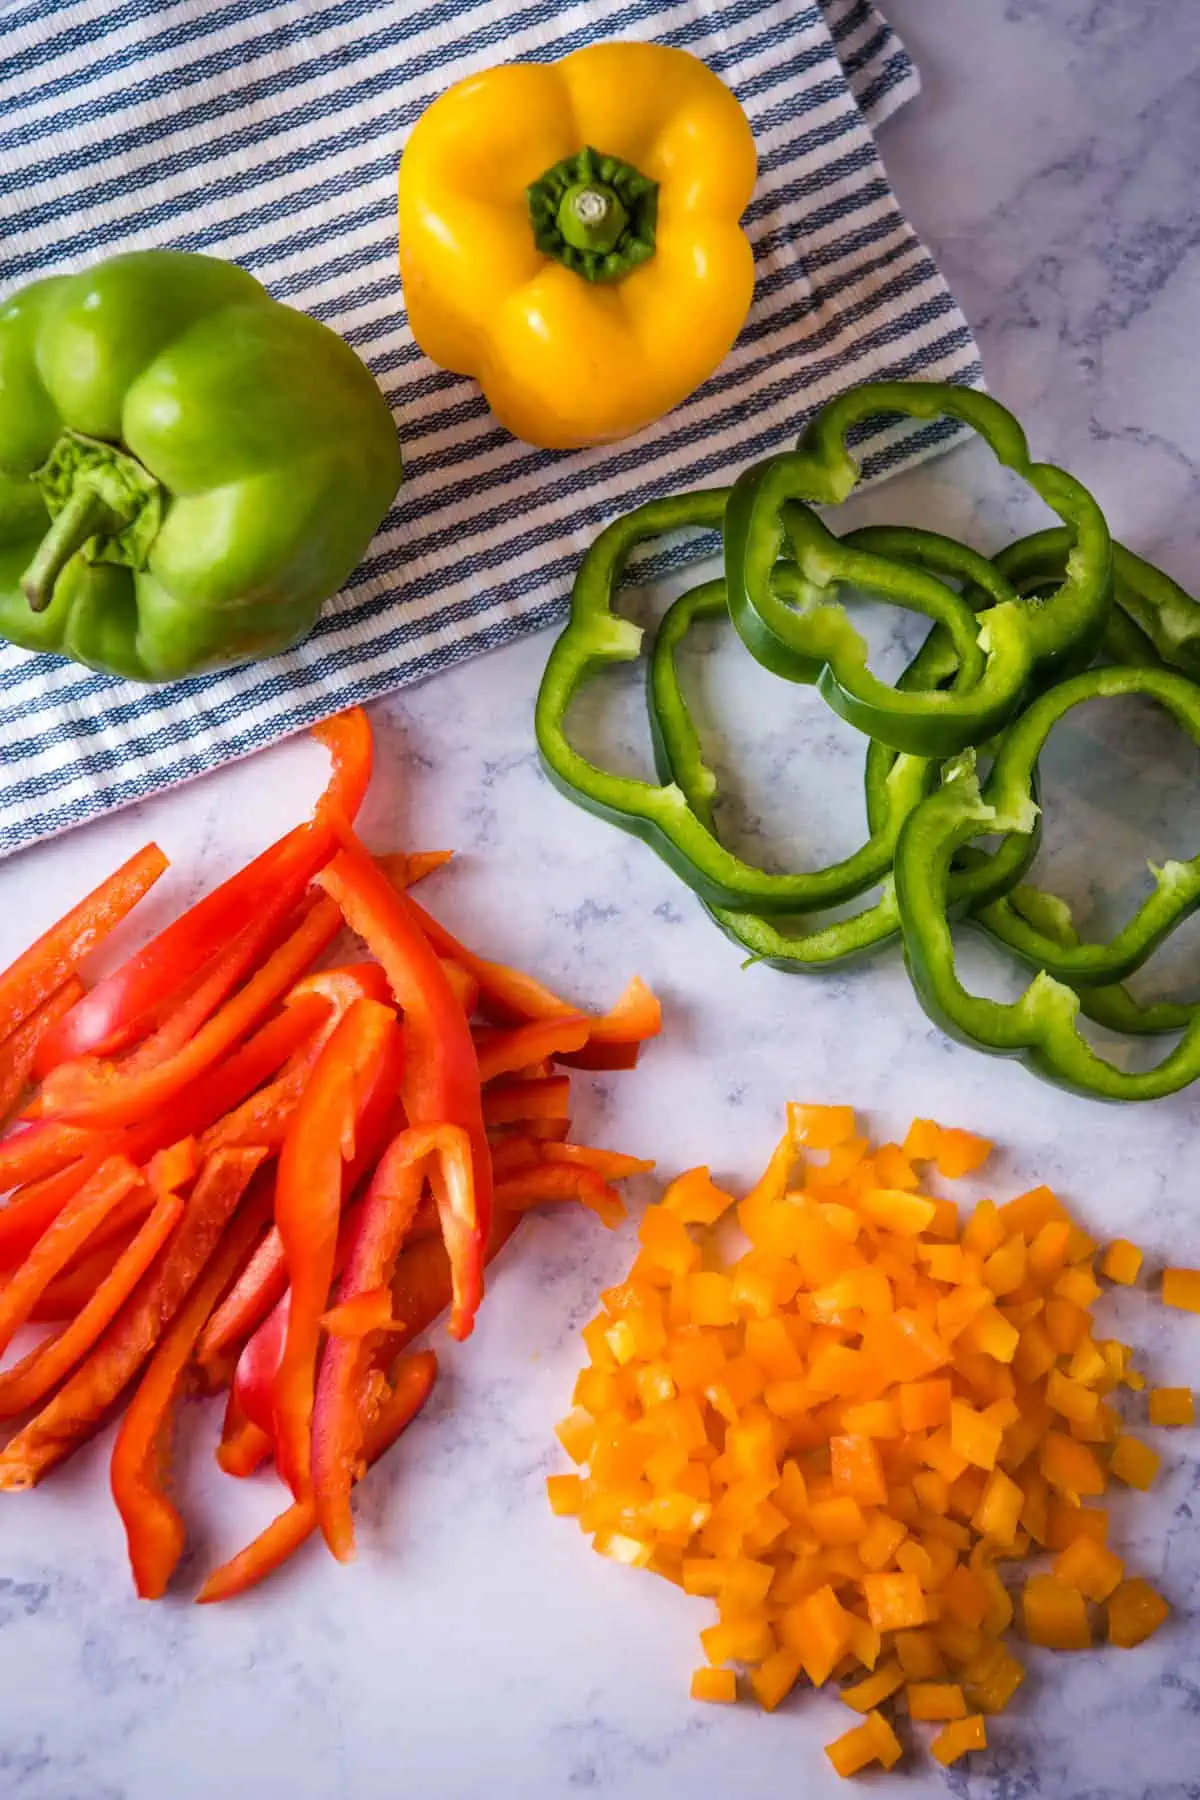 how to cut a pepper 4 ways, including julienne strips, diced, and rings with red, green, and yellow bell peppers on white marble countertop